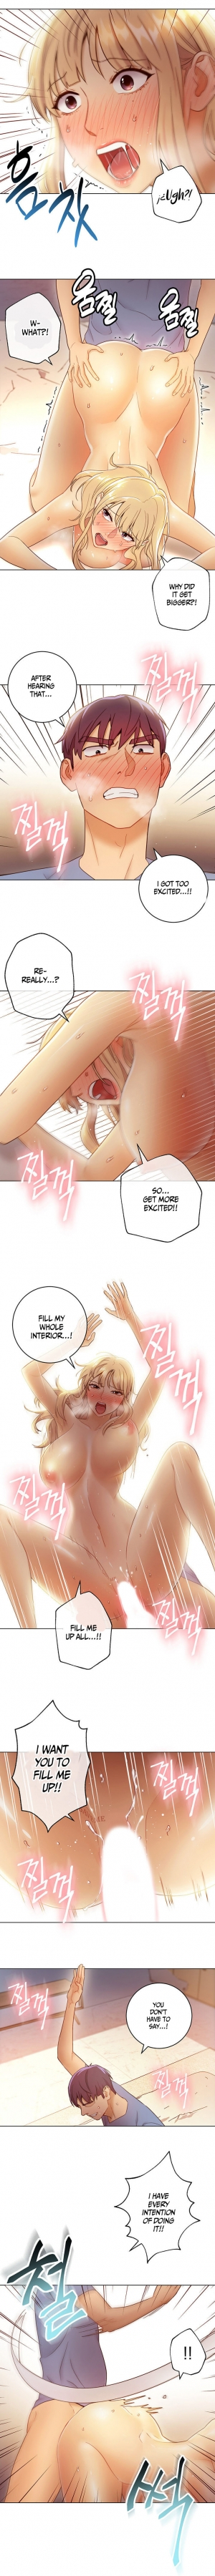  [Neck Pilllow] Stepmother Friends Ch.39/? [English] [Hentai Universe] NEW! 13/10/2020  - Page 372